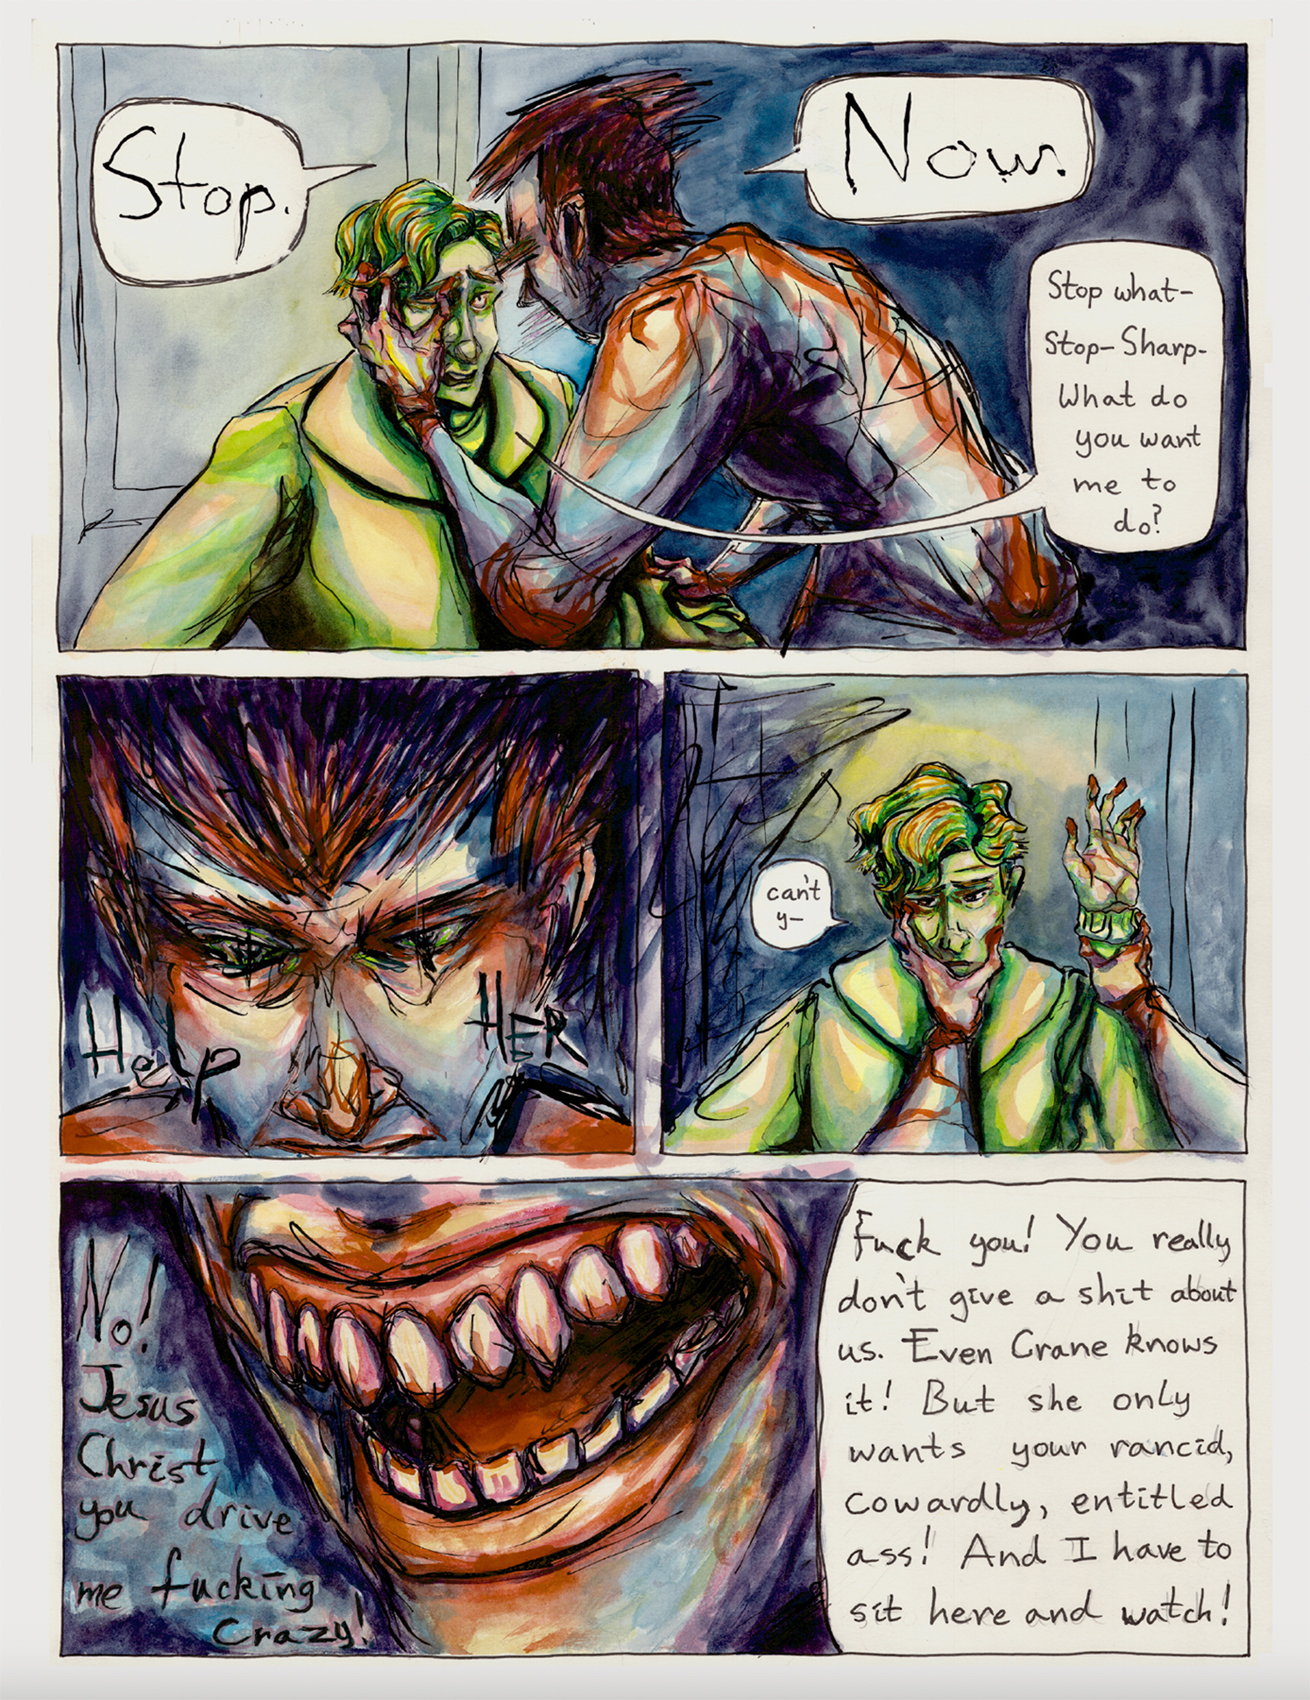 comic page from Against the Floor. The character Sharp angrily confronts the main character Killian about helping Crane. Image courtesy of Daniell Stromanthe